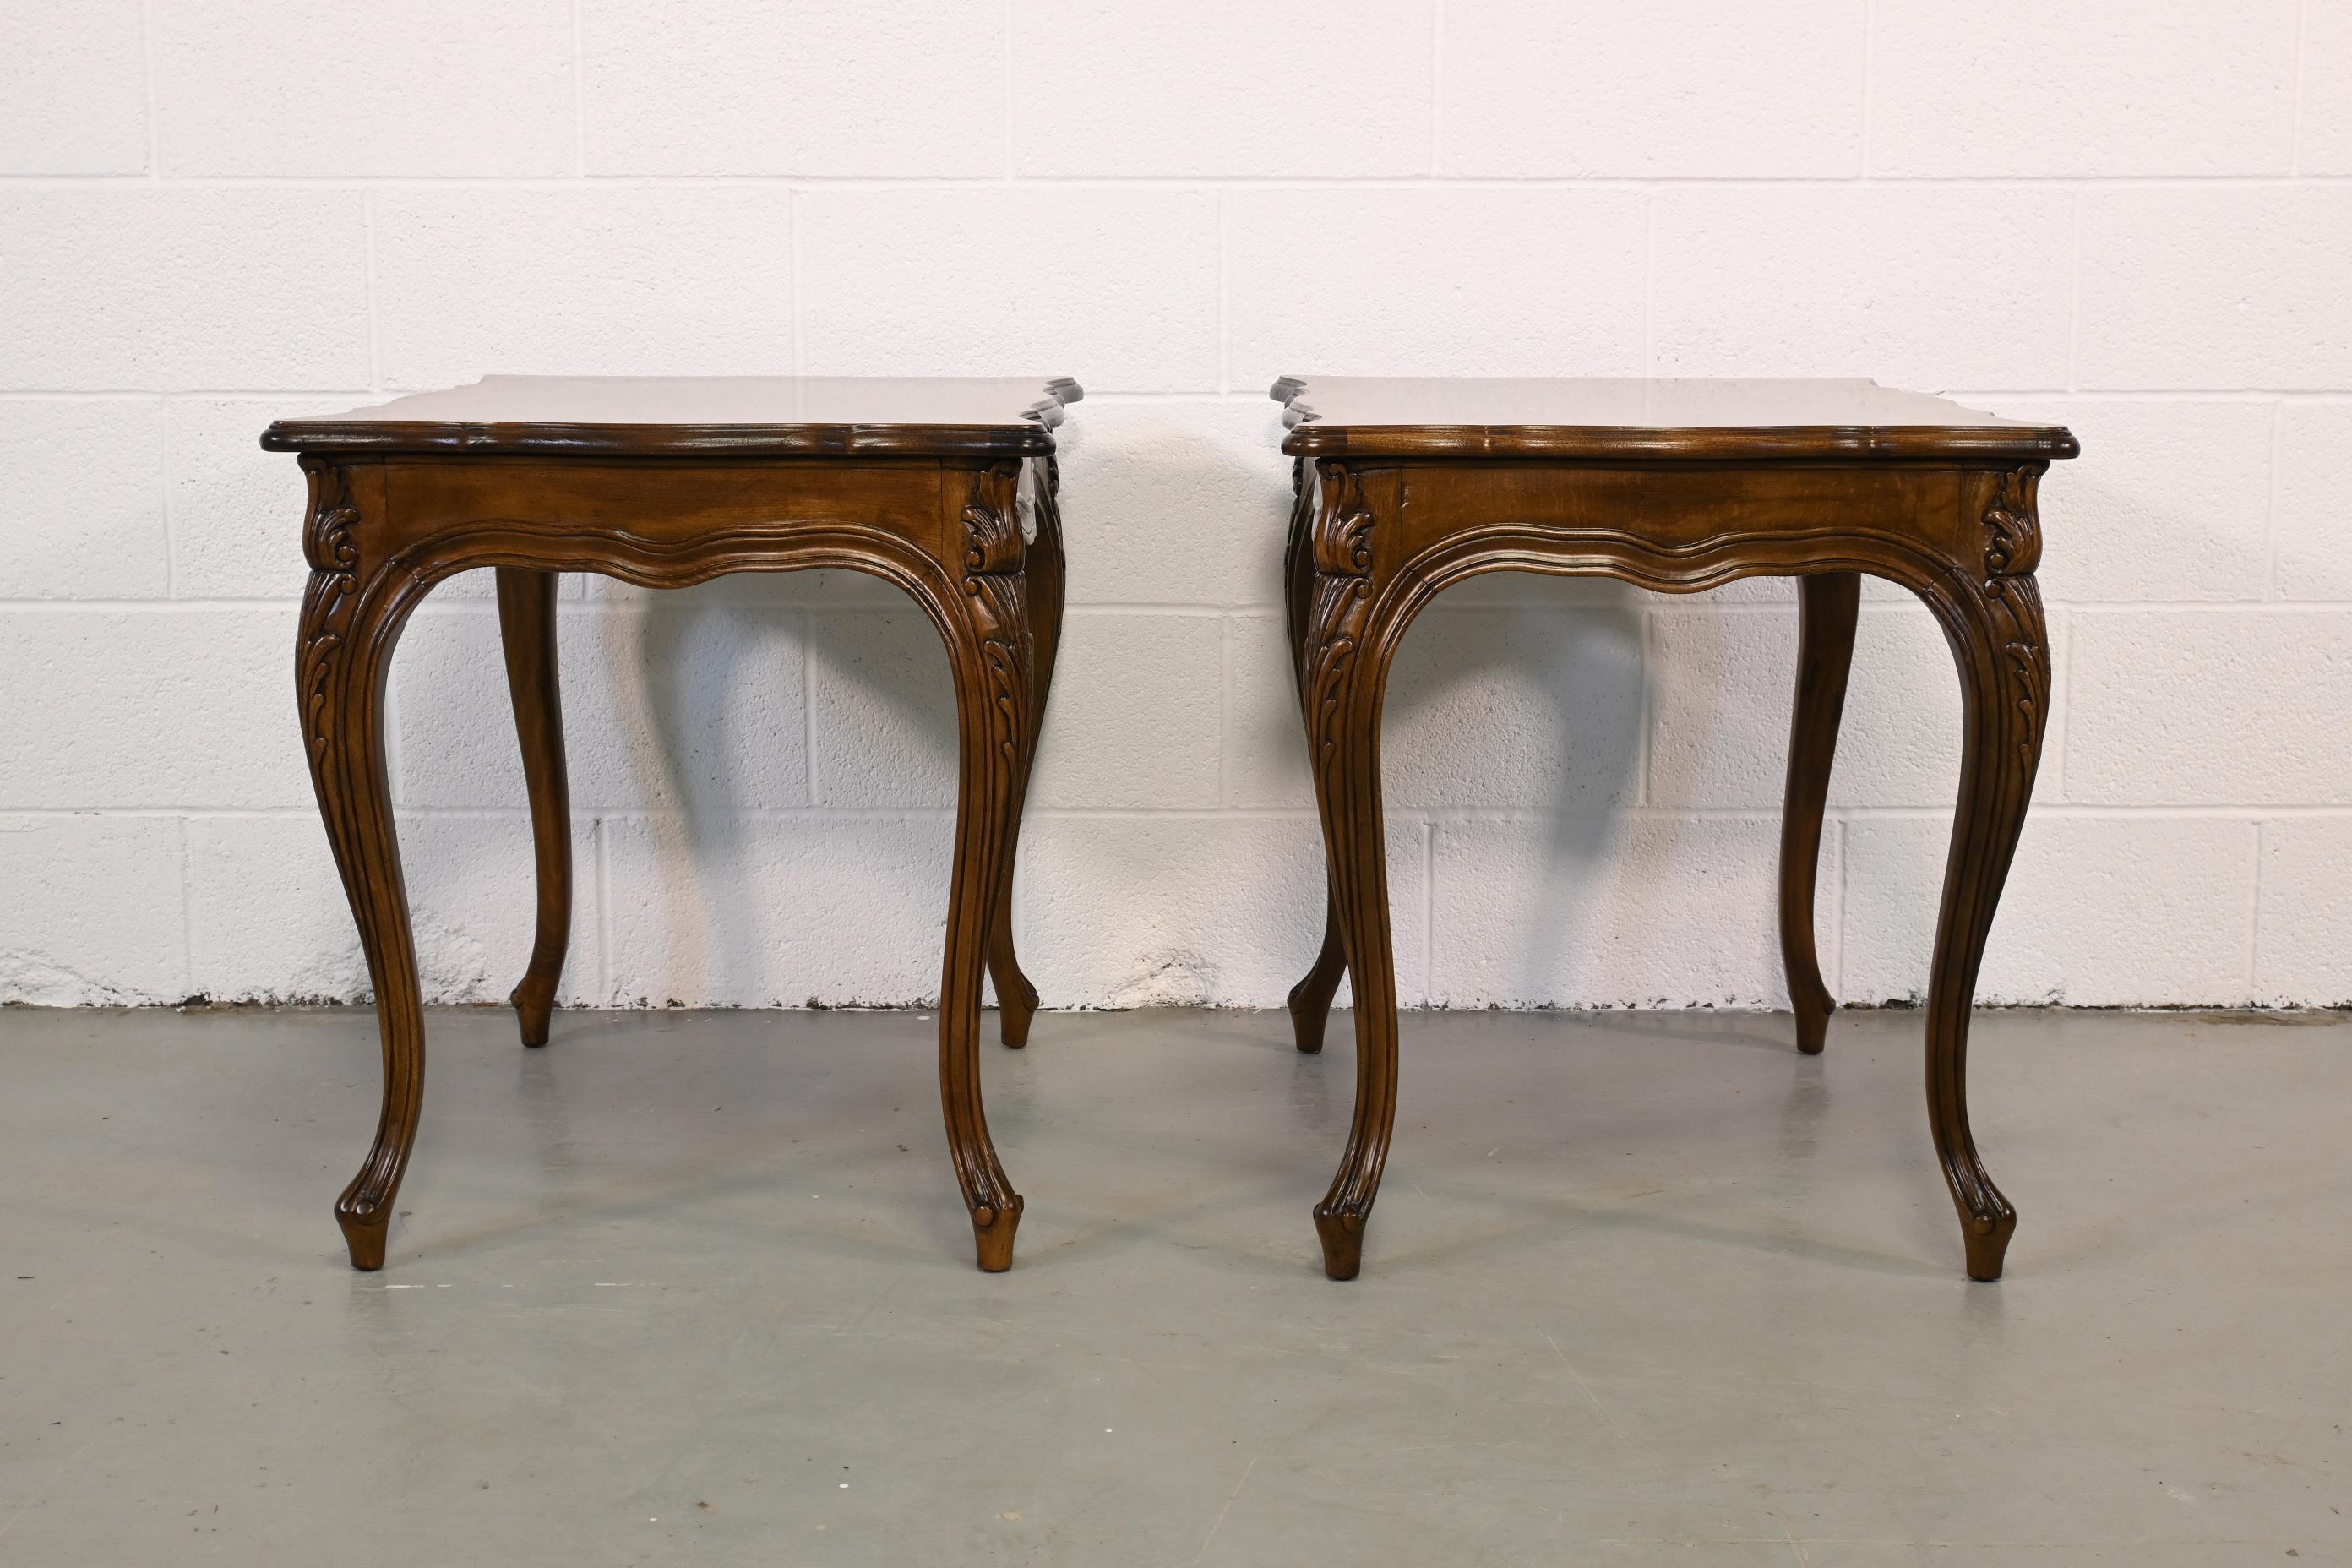 Karges Furniture French Provincial Burled Walnut End Tables - a Pair In Excellent Condition For Sale In Morgan, UT